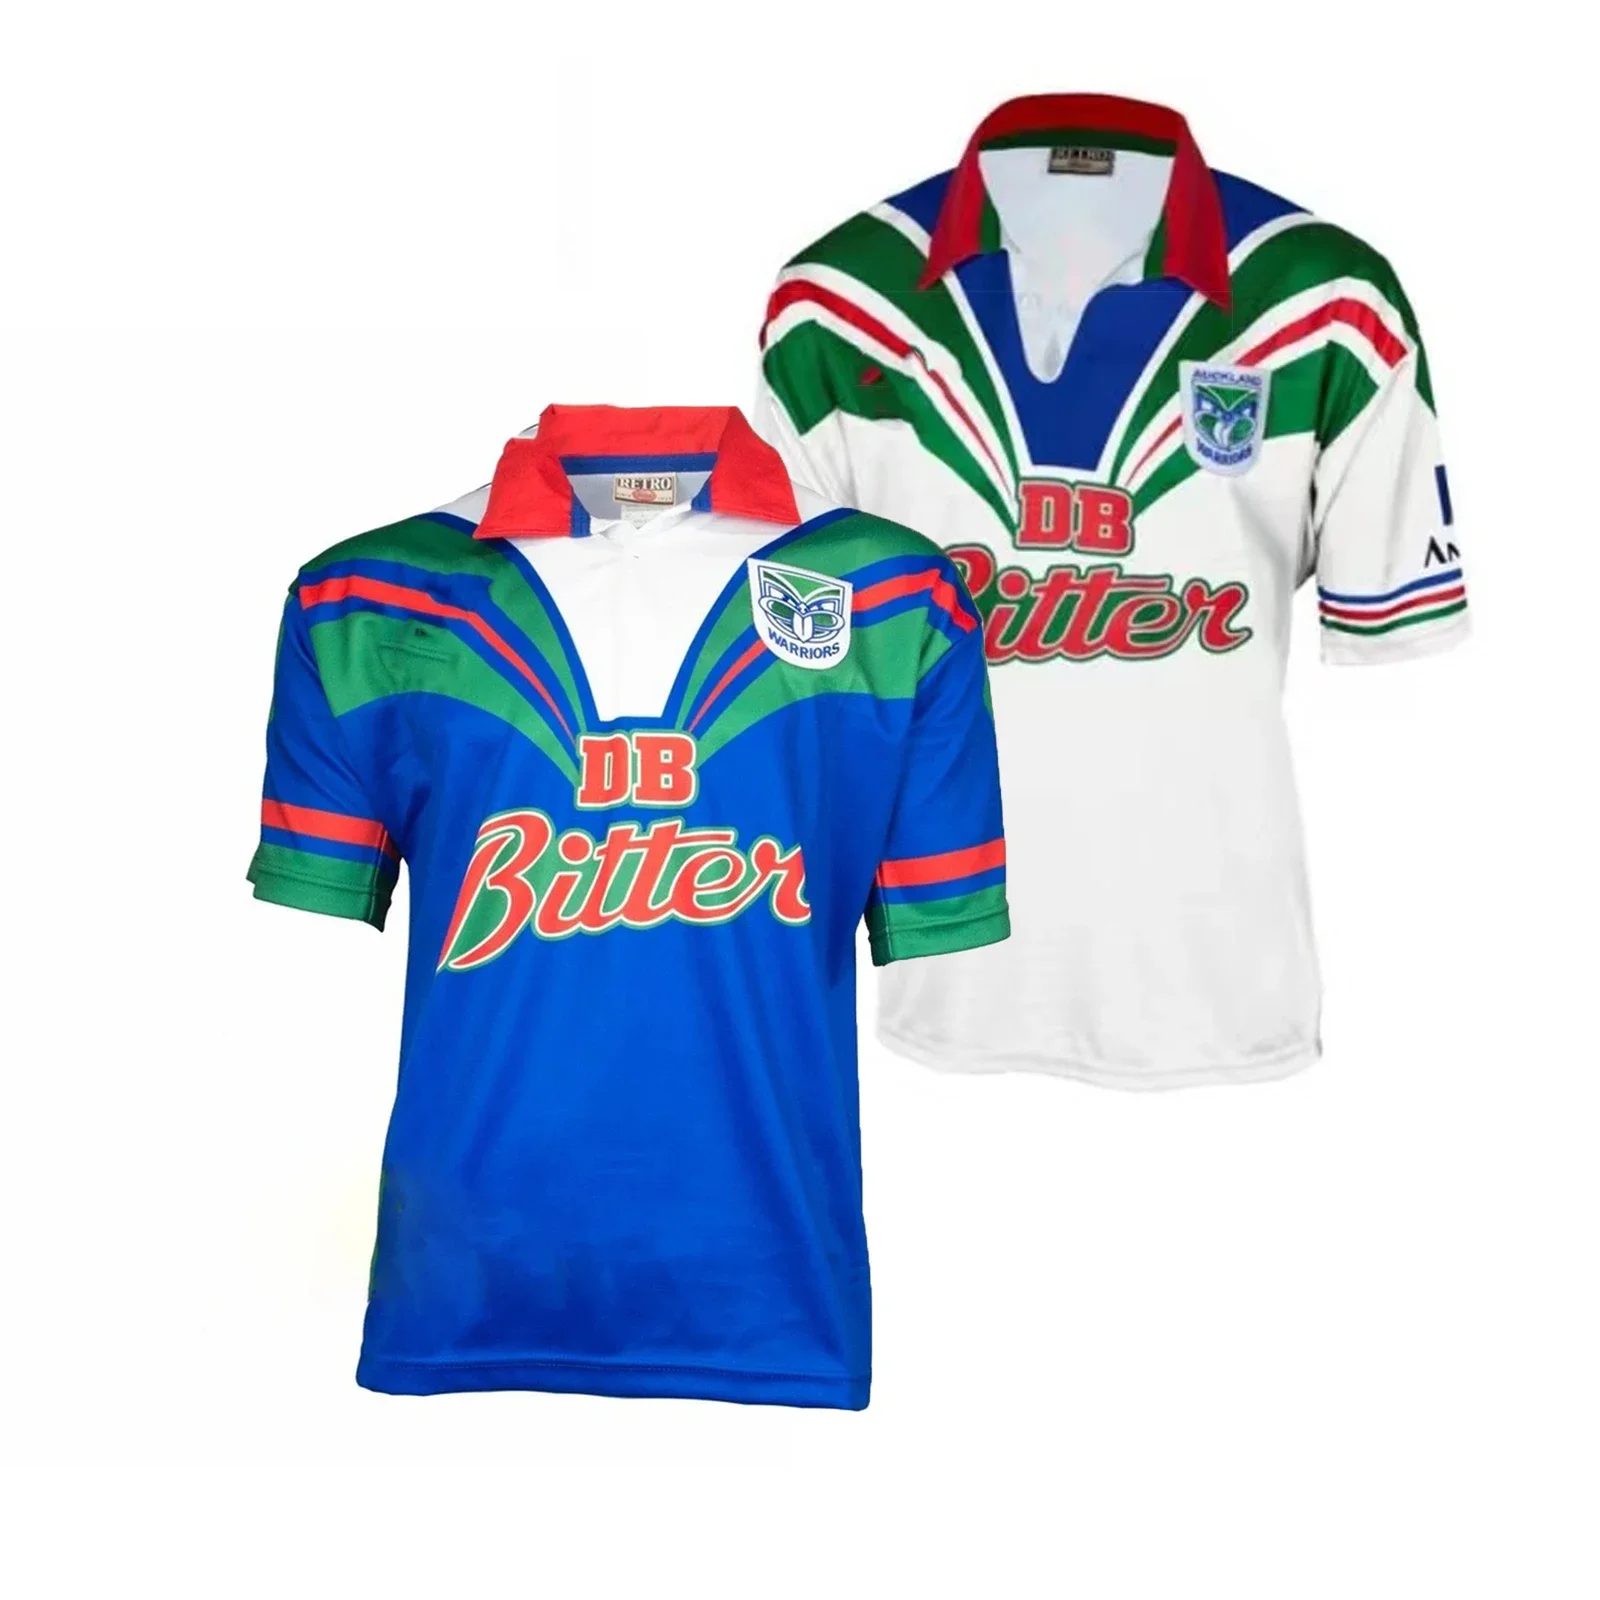 1995 Warriors Retro Jersey RUGBY JERSEY Sport personalizza S-5XL